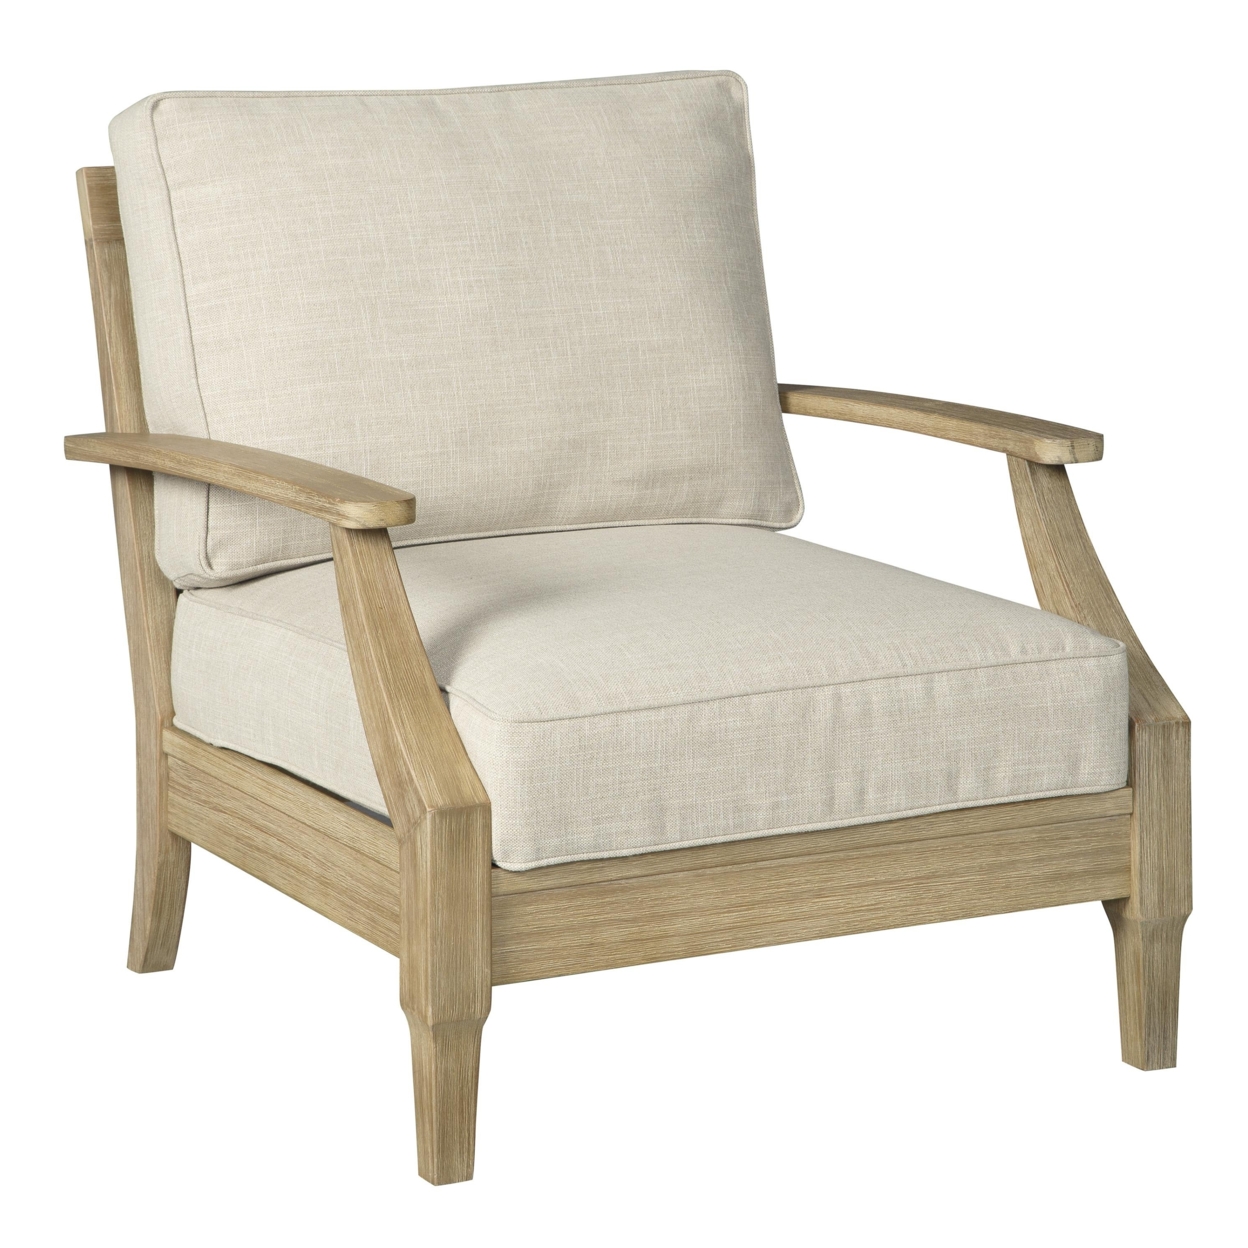 Traditional Wooden Chair With Fabric Cushioned Seating, Beige And Brown- Saltoro Sherpi